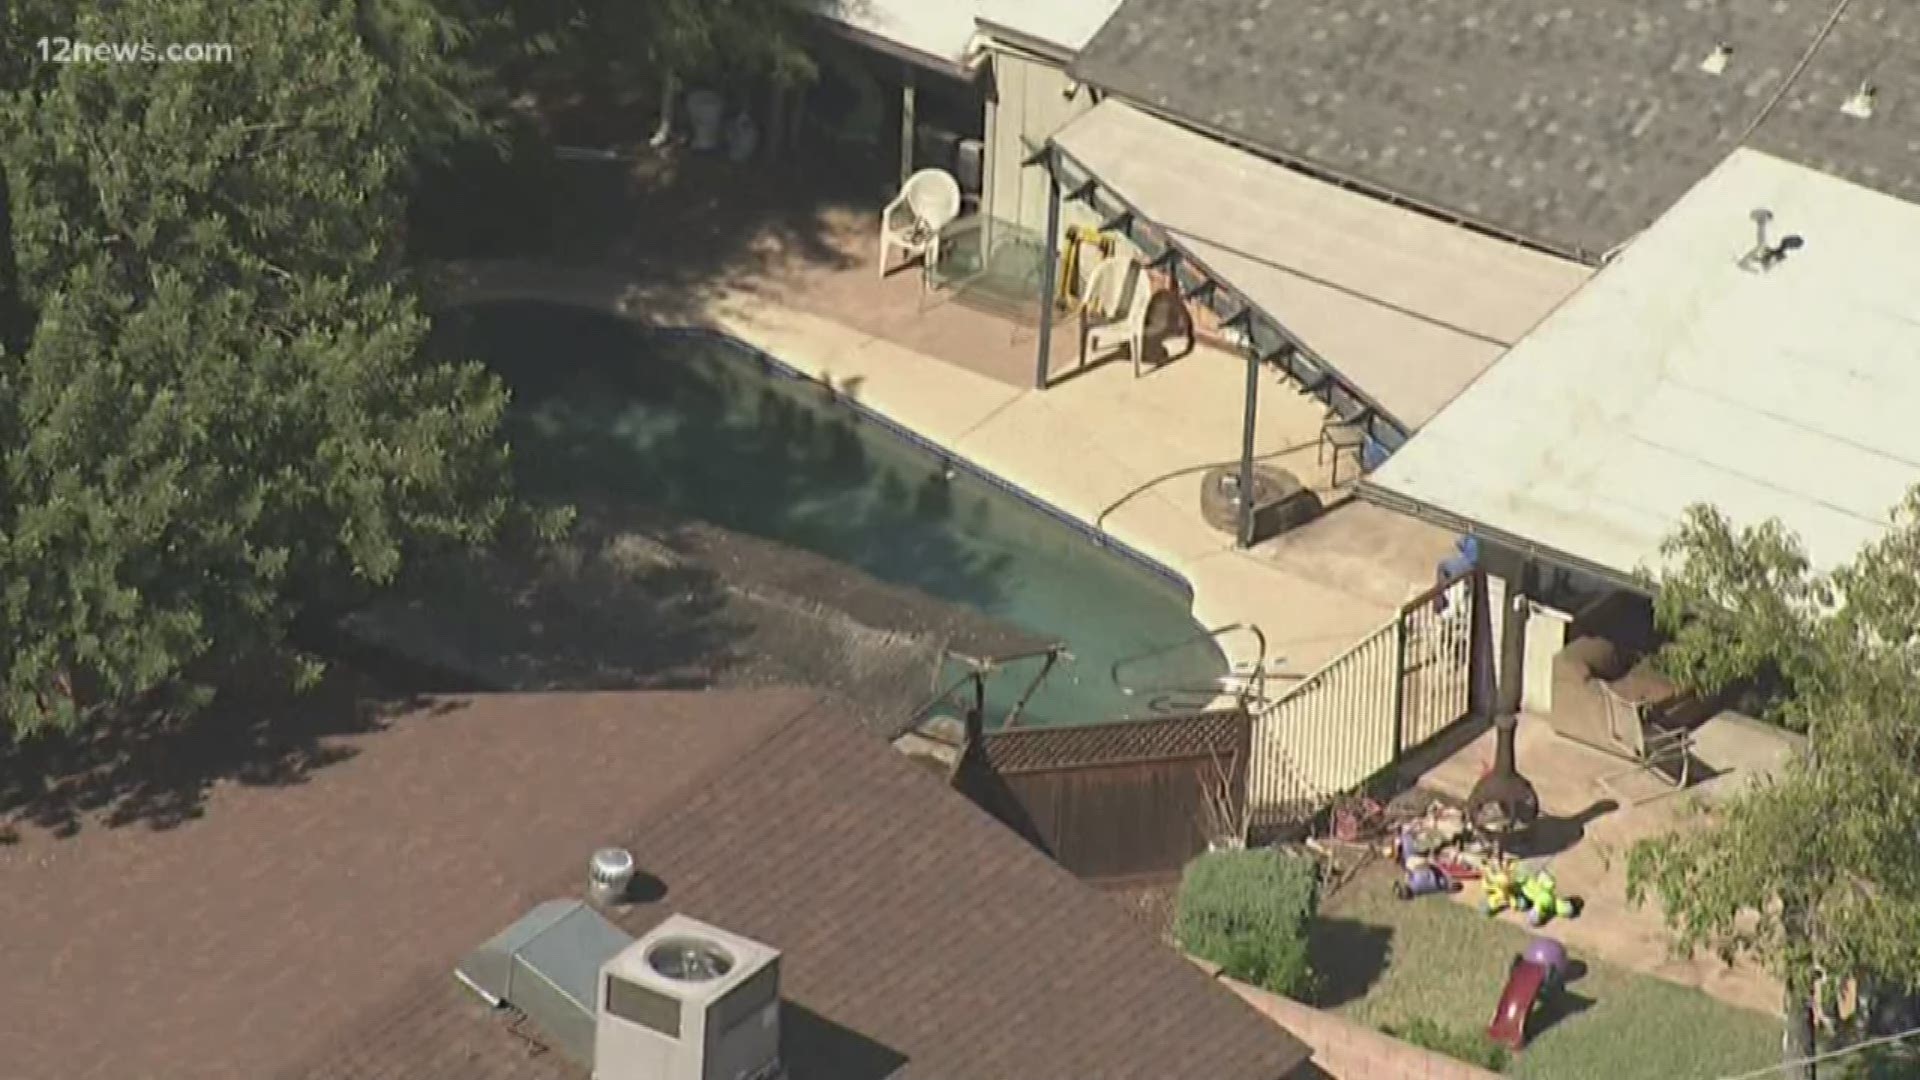 The child is fighting to survive after being pulled from a pool and taken to a hospital in critical condition.